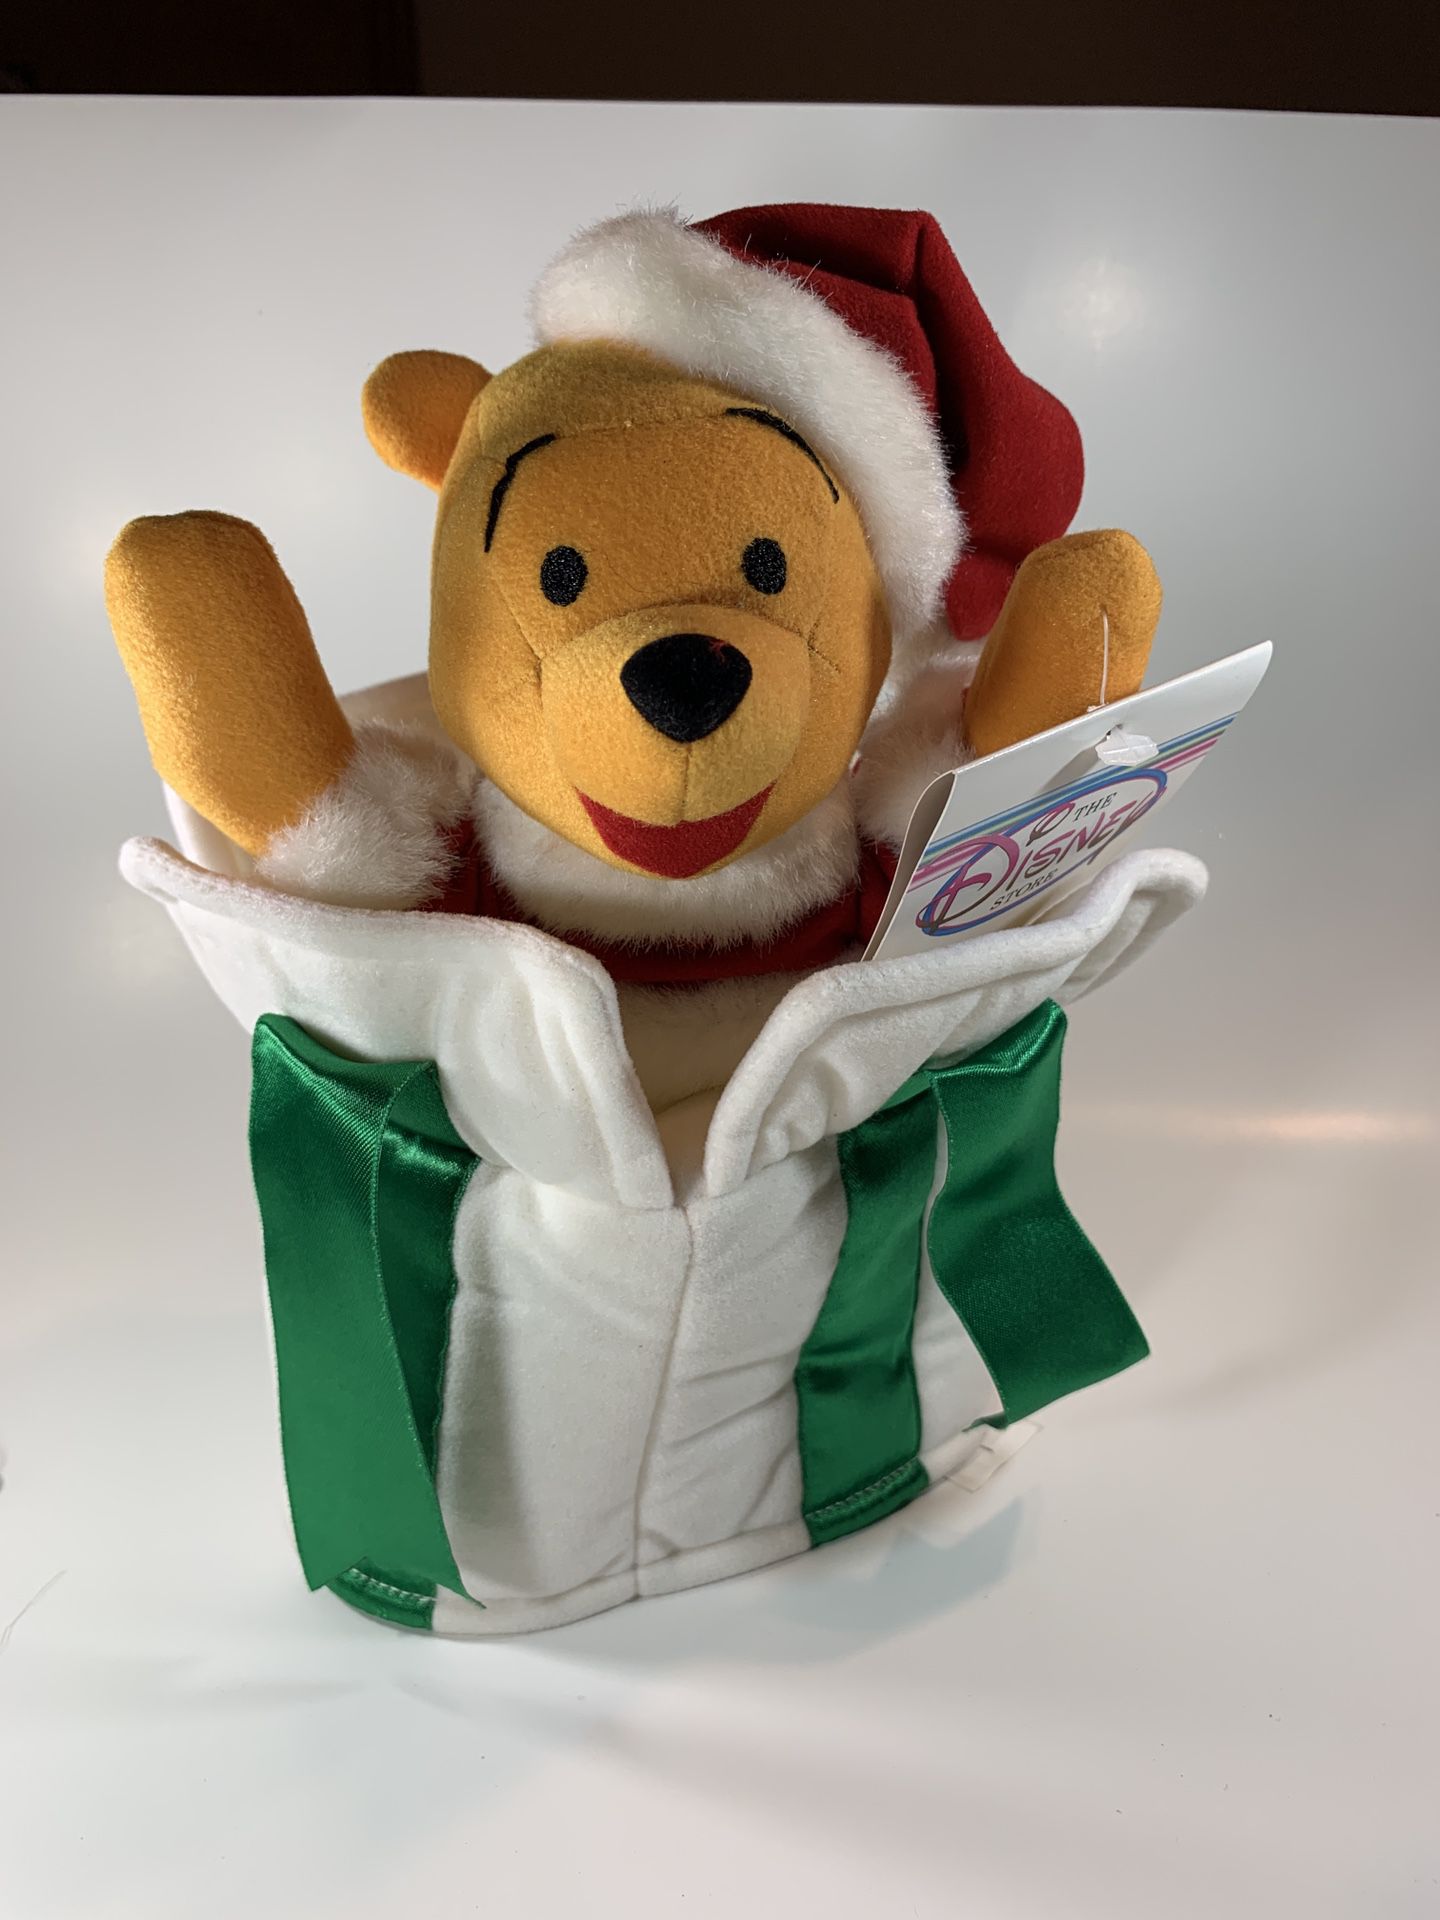 Christmas Pooh Tree Topper - Disney Winnie the Pooh - Retired - Many Pooh plushes available $10 each or $8 each if you buy 3 or more!! $160 BUYS ALL